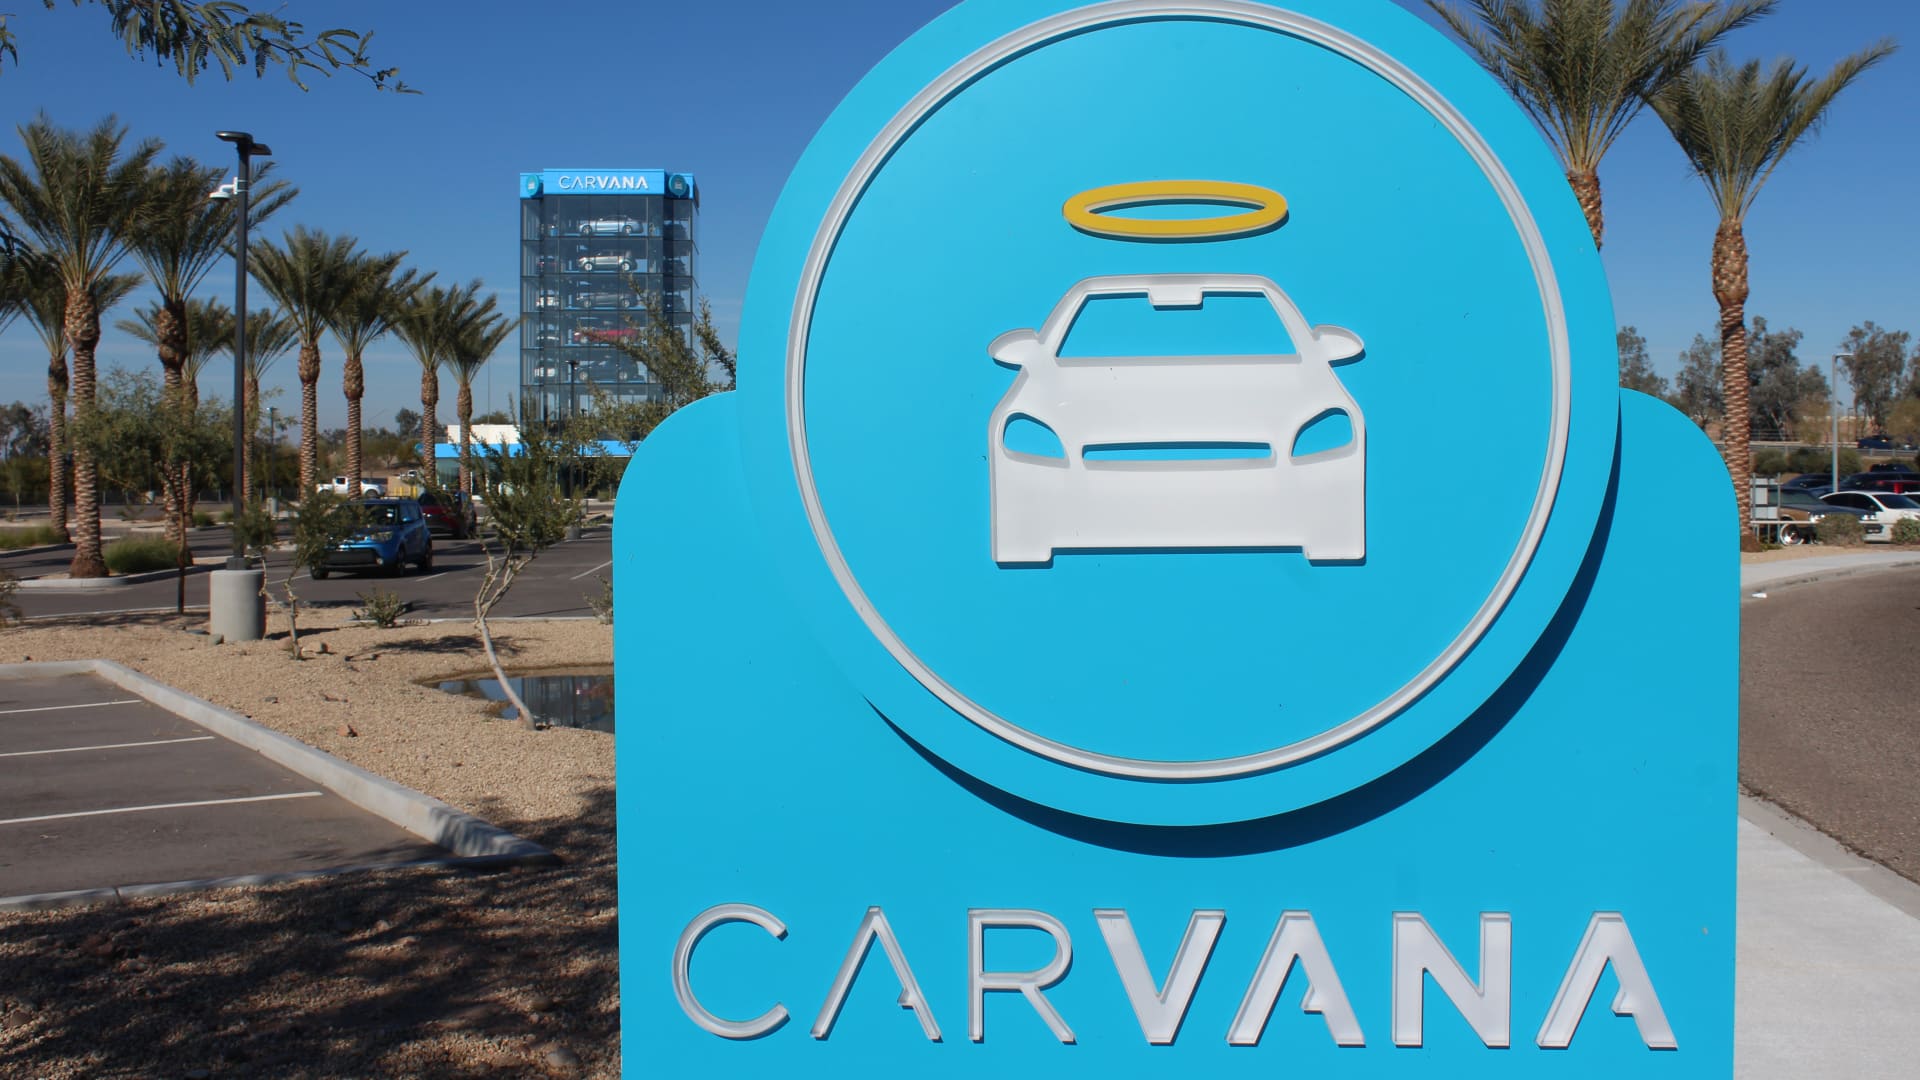 A year after bankruptcy considerations, Carvana is leaner and ready for its Wall Street redemption